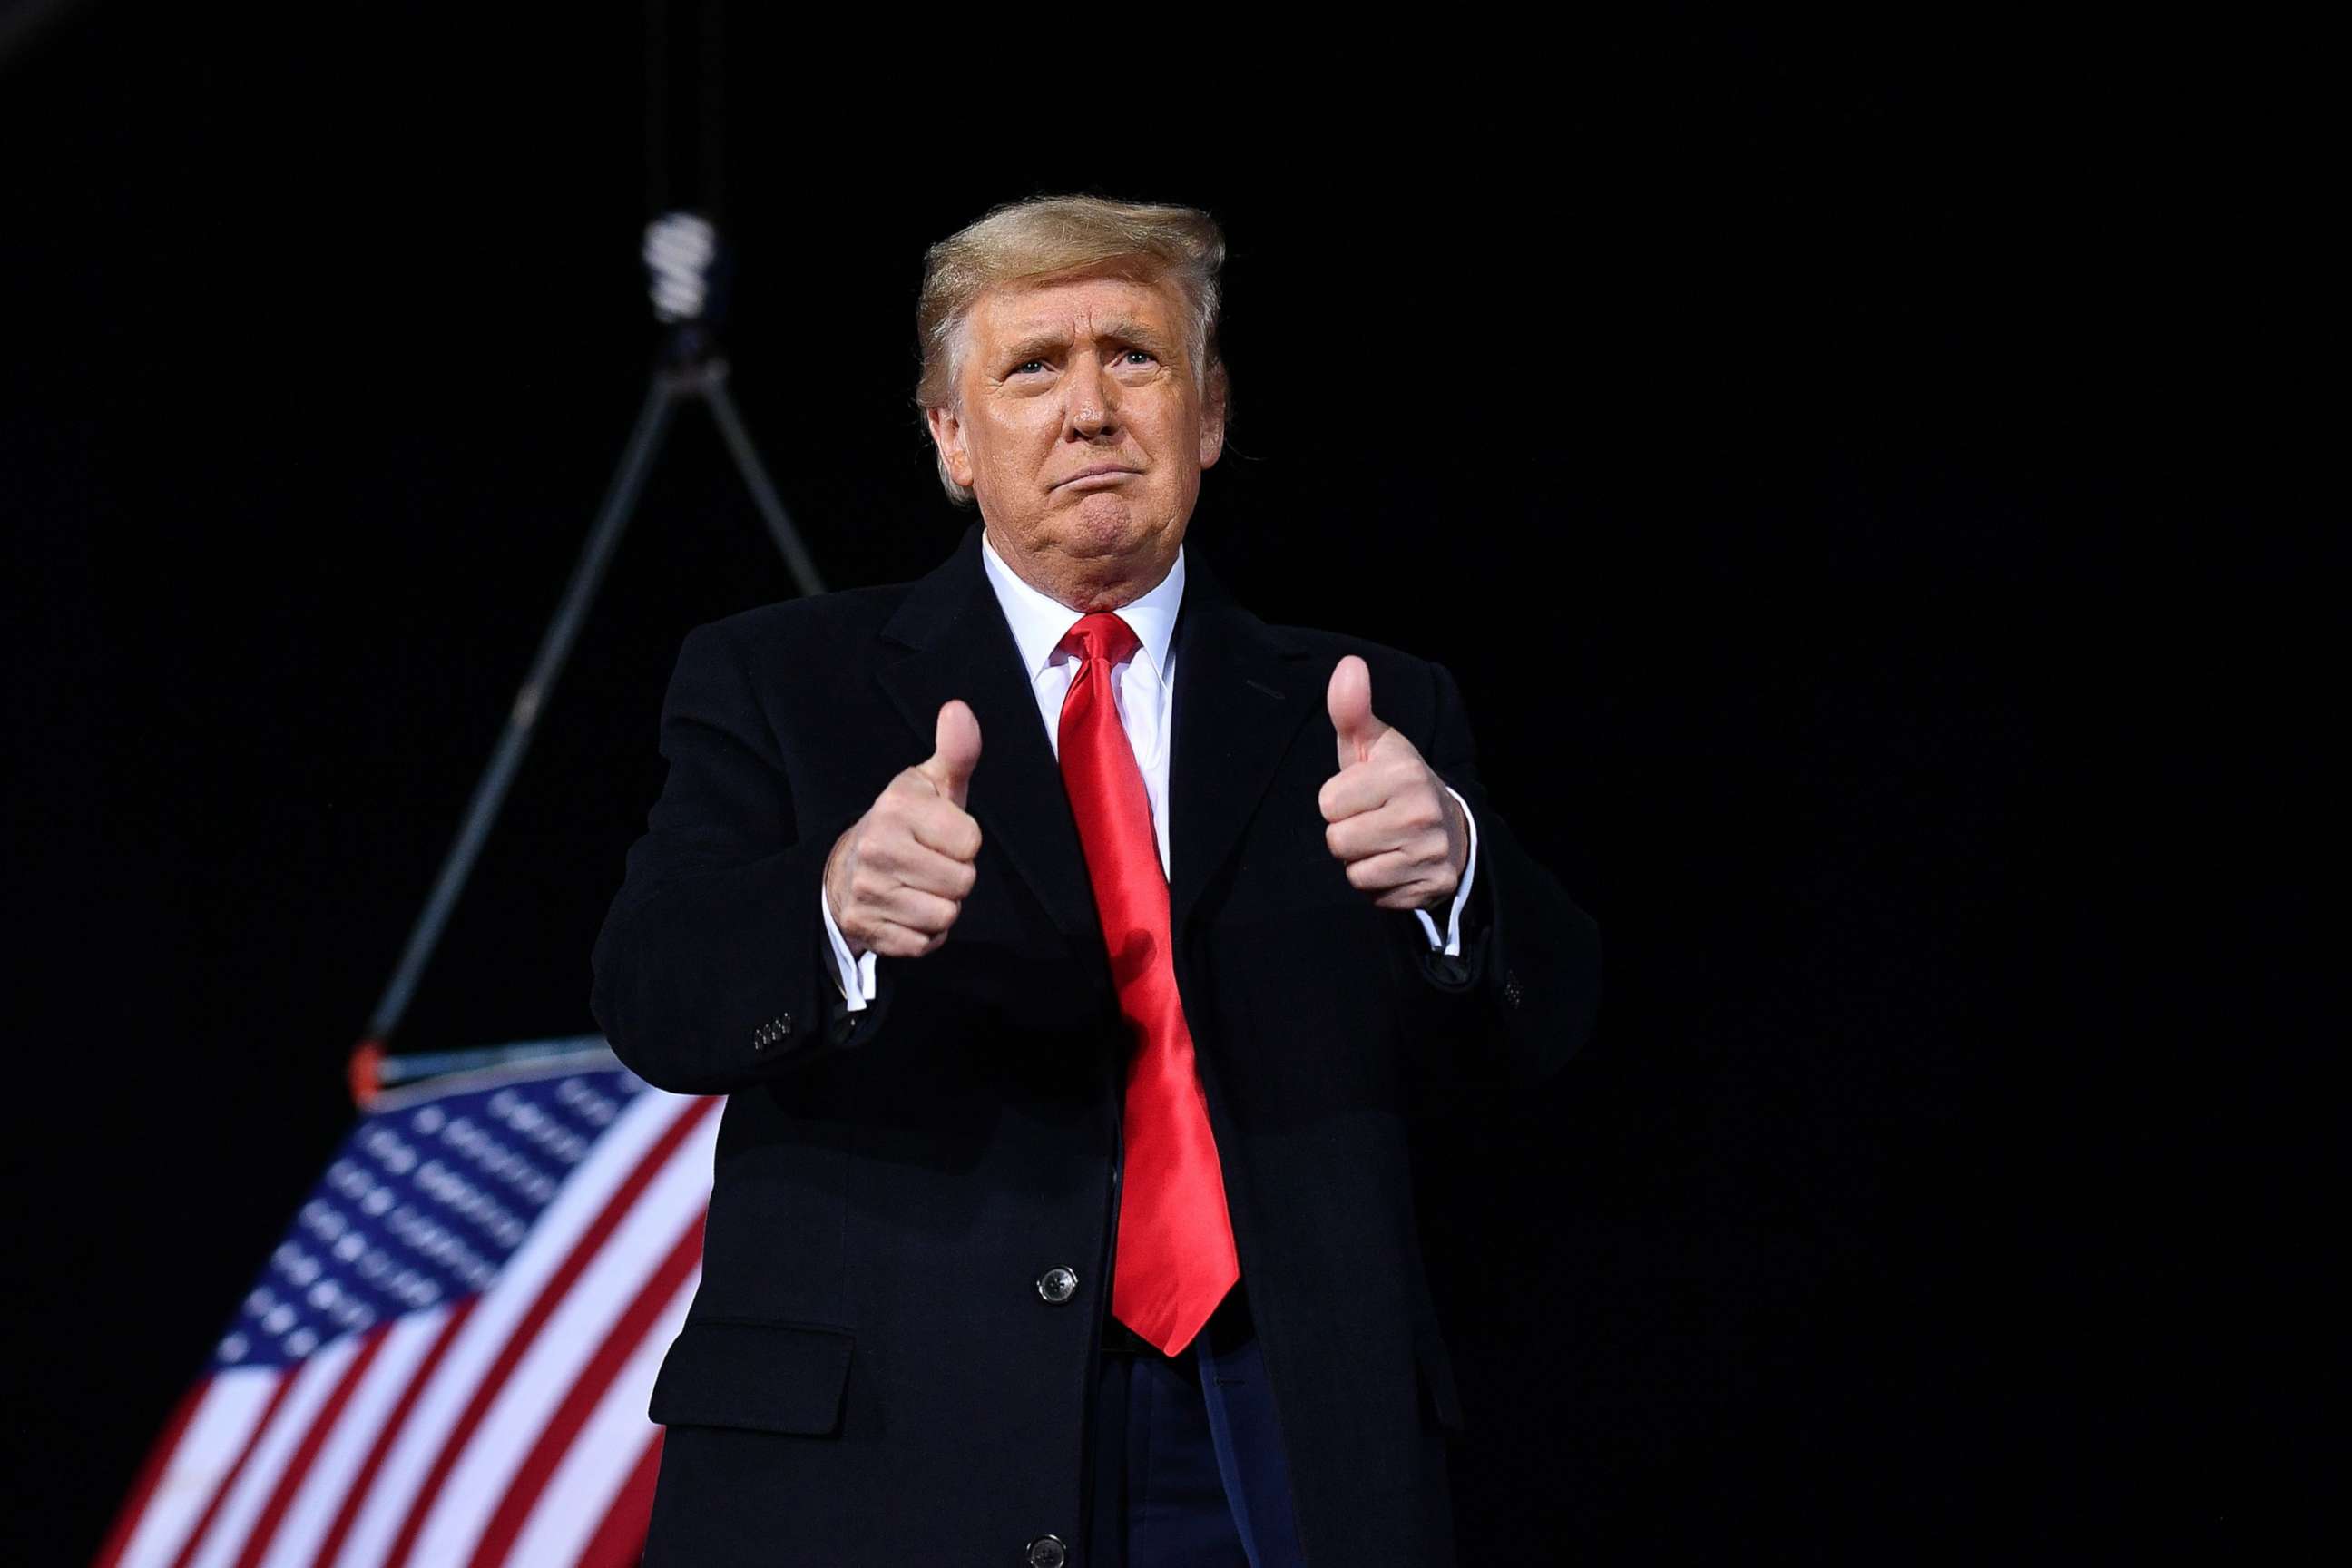 PHOTO: In this Jan. 4, 2021, file photo, President Donald Trump gives two thumbs up during a rally in support of Republican incumbent senators Kelly Loeffler and David Perdue ahead of Senate runoff in Dalton, Ga.